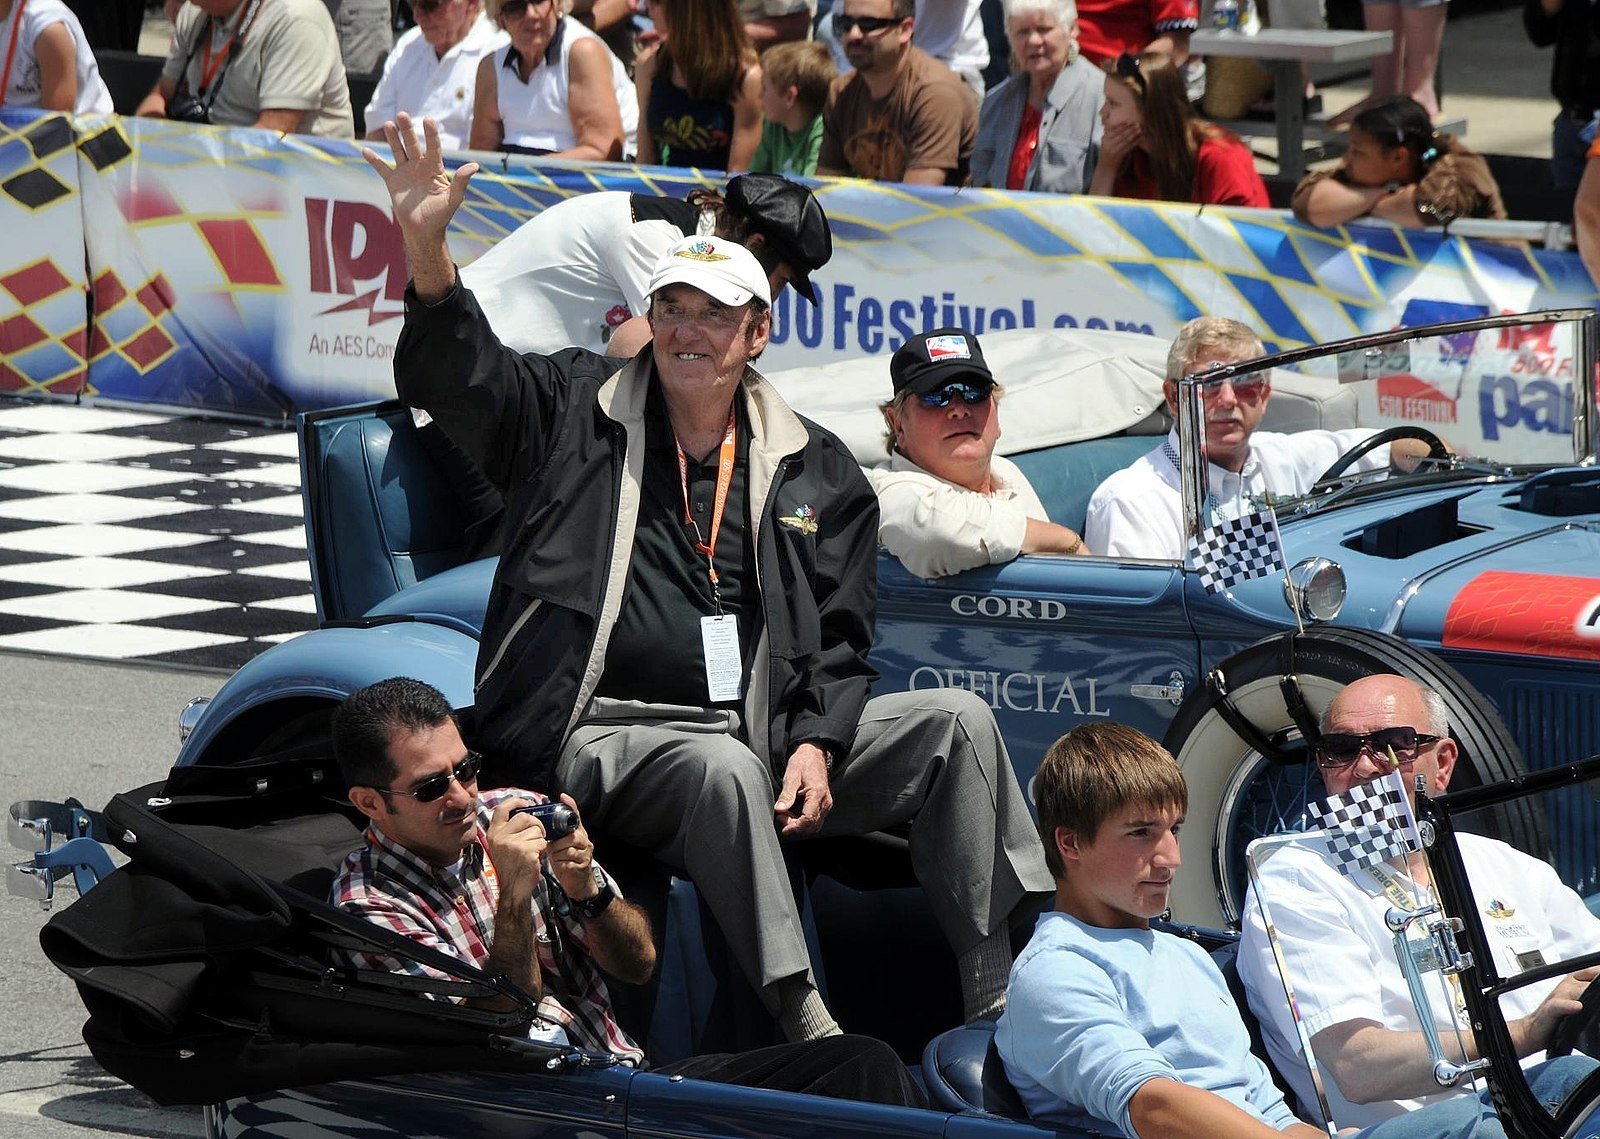 Jim Nabors at the opening of the Indianapolis 500 on May 24, 2008. | Source: Wikimedia Commons